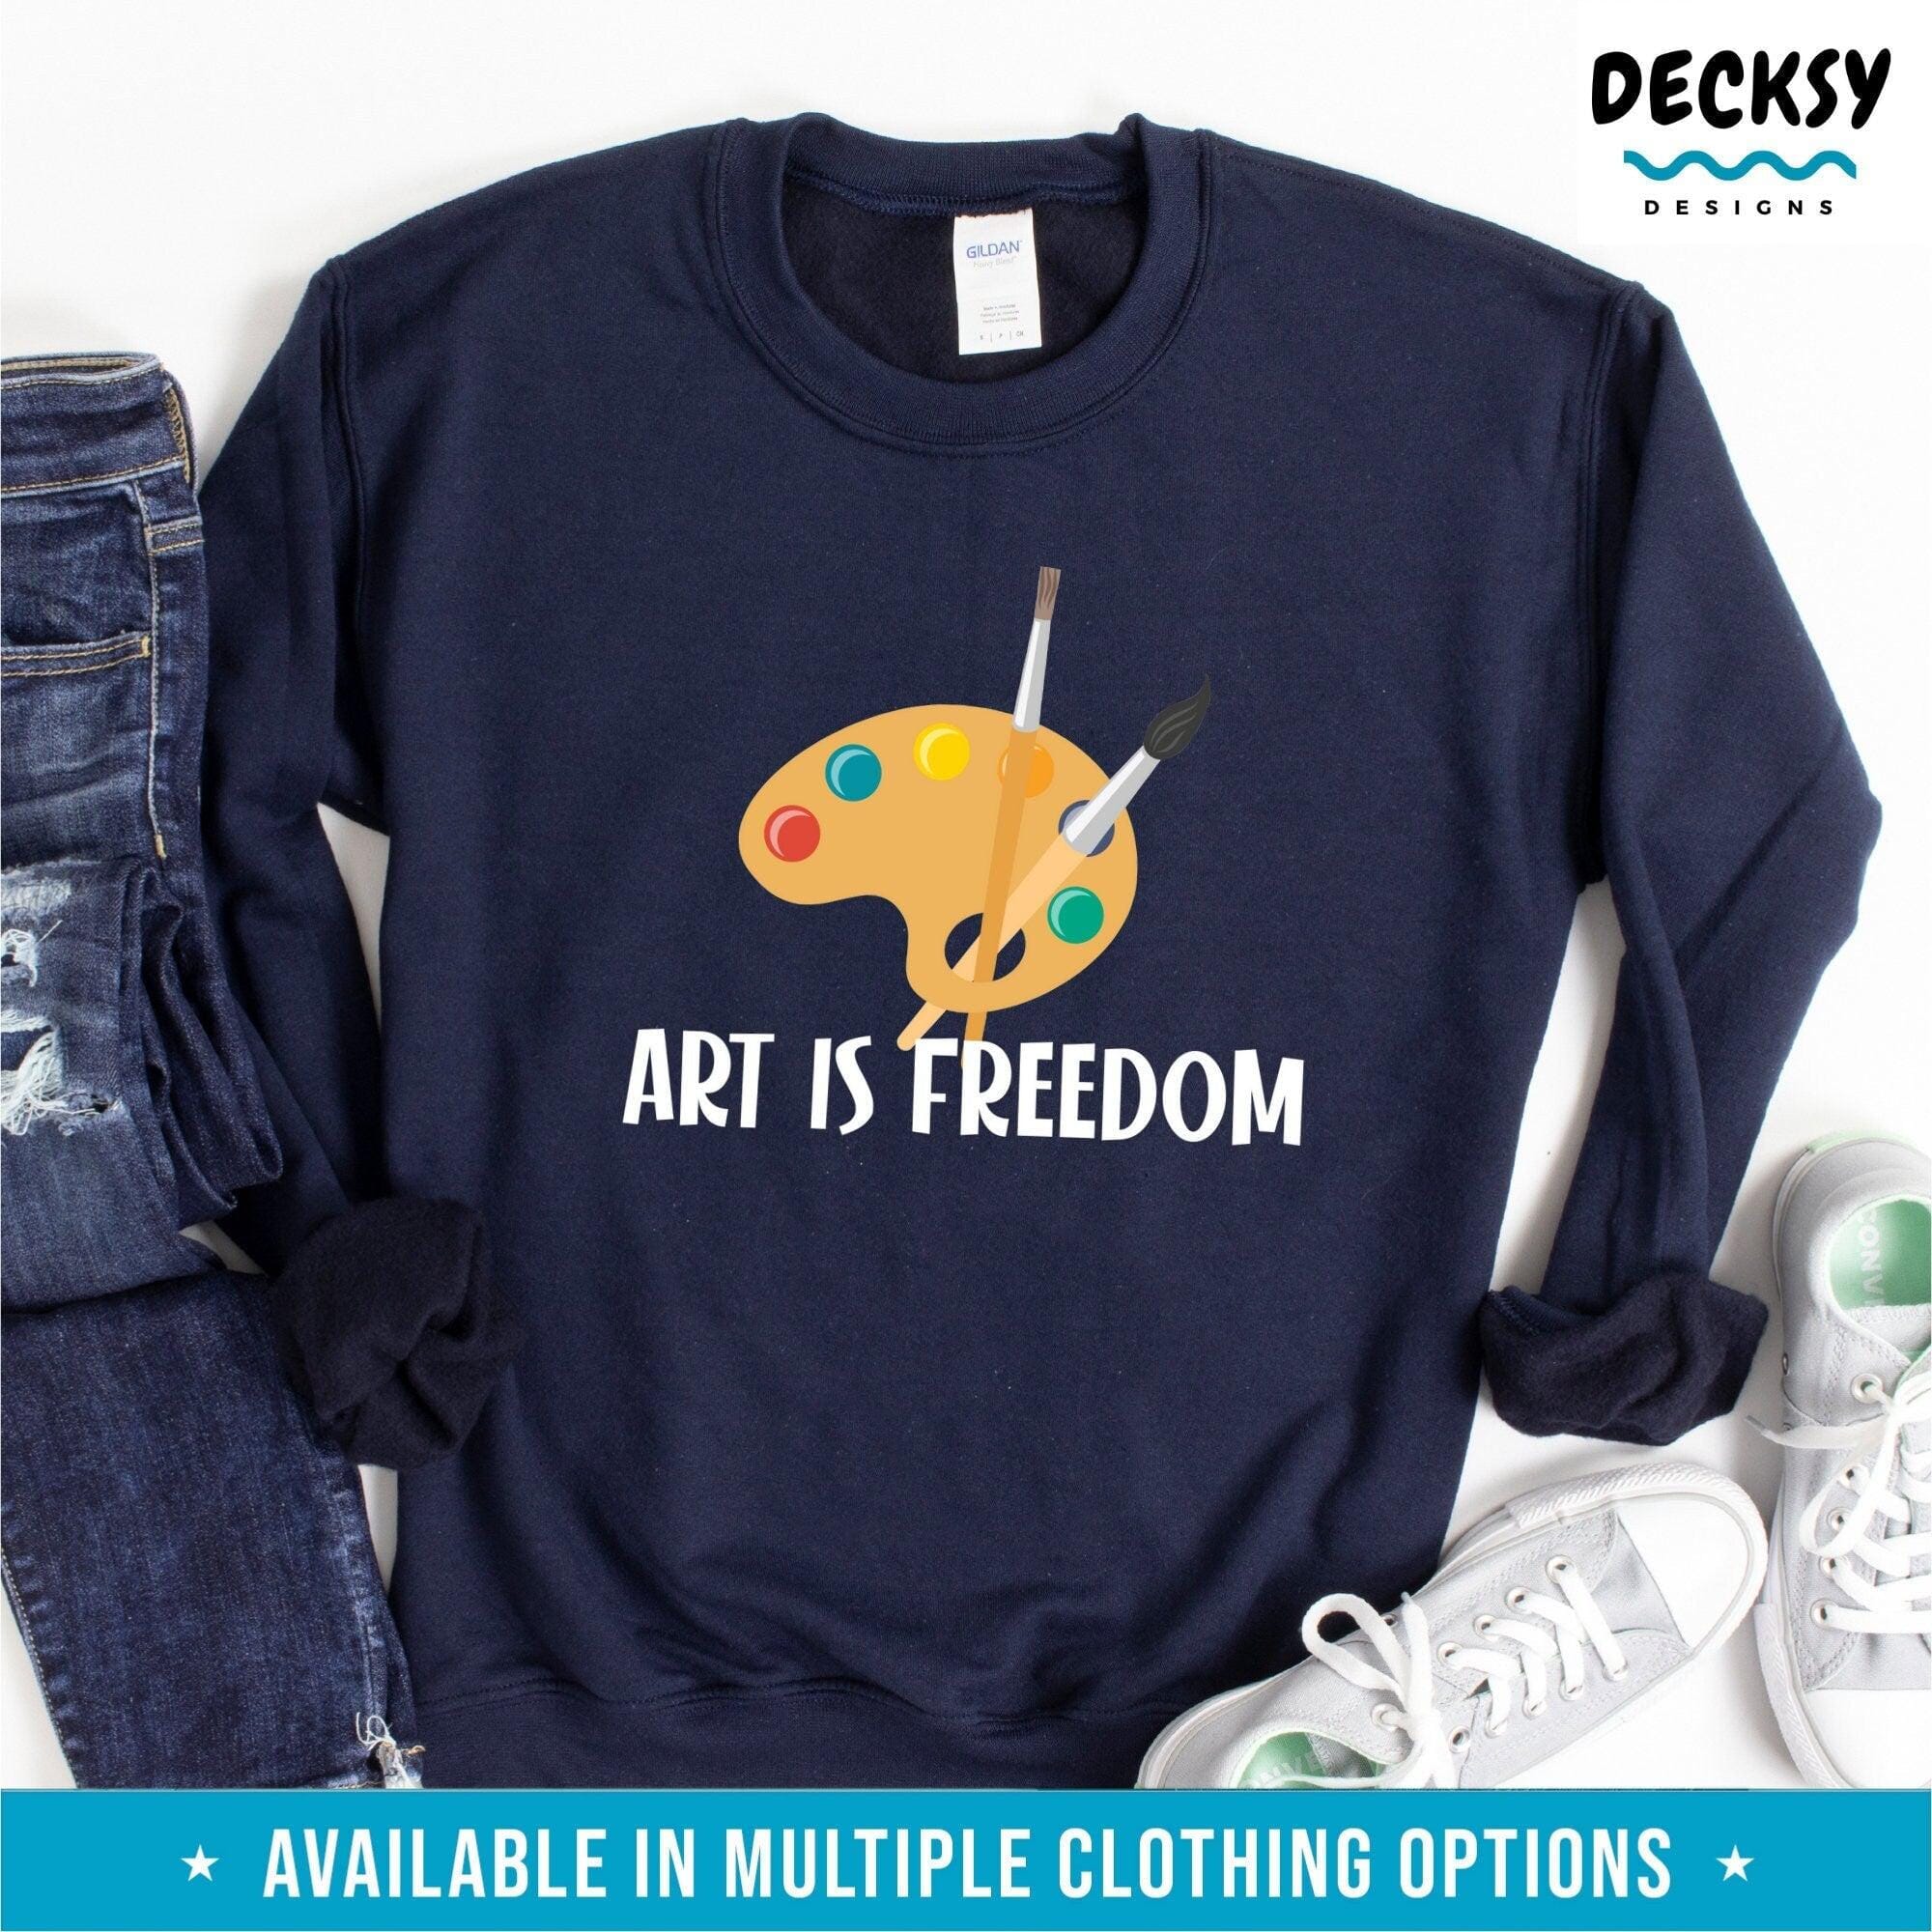 Art Is Freedom Shirt, Gift For Artist-Clothing:Gender-Neutral Adult Clothing:Tops & Tees:T-shirts:Graphic Tees-DecksyDesigns